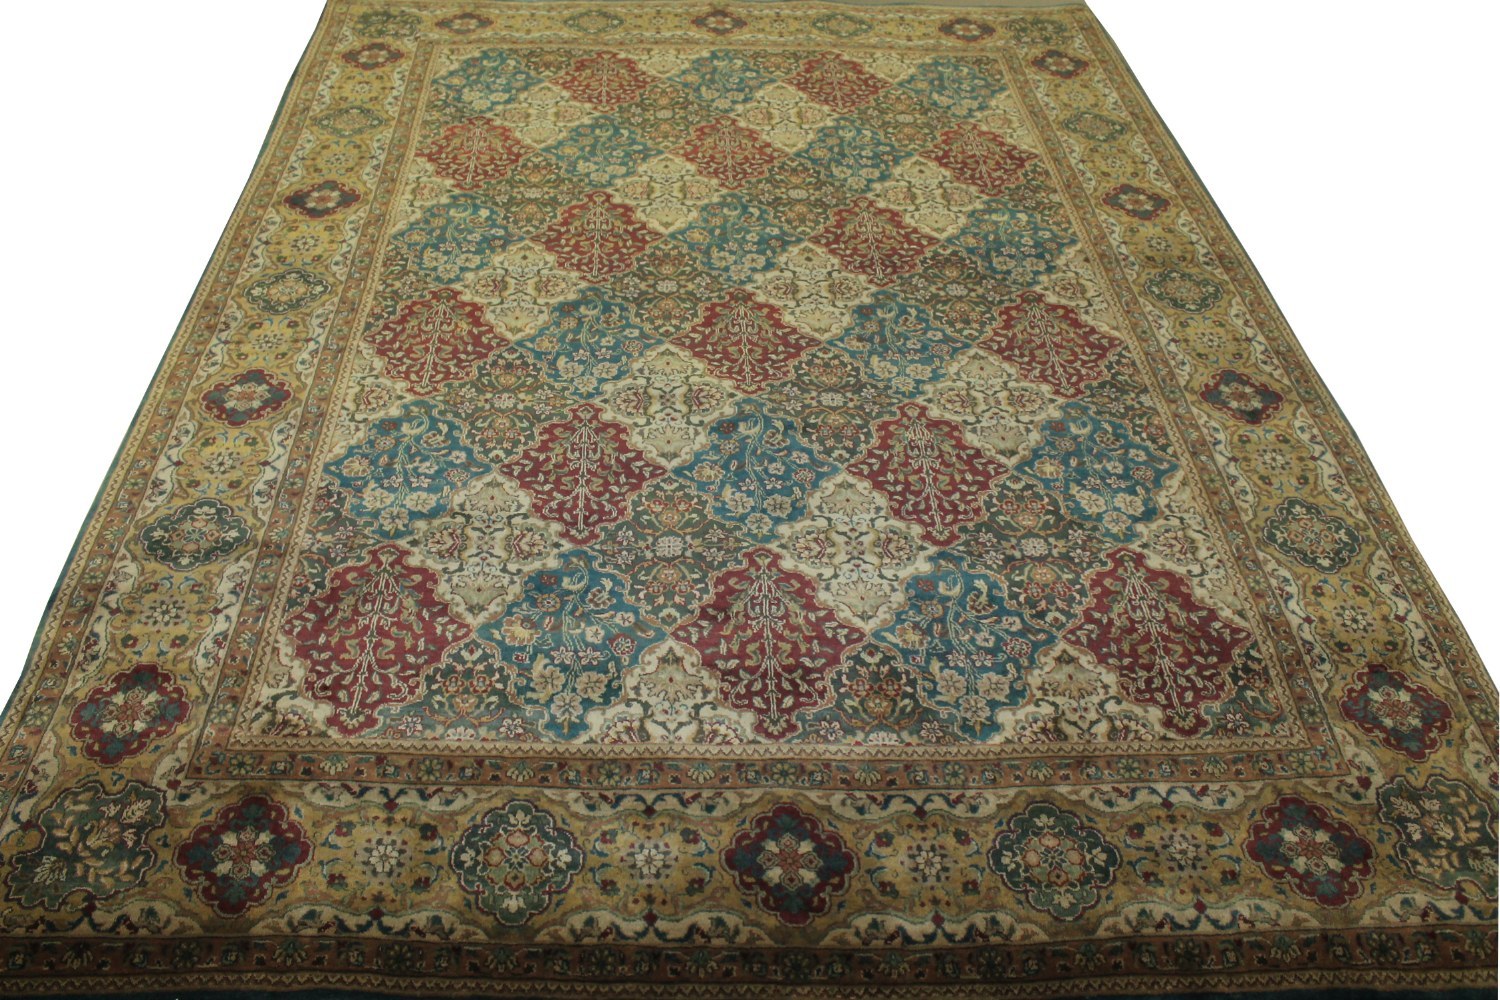 9x12 Jaipur Hand Knotted Wool Area Rug - MR0453